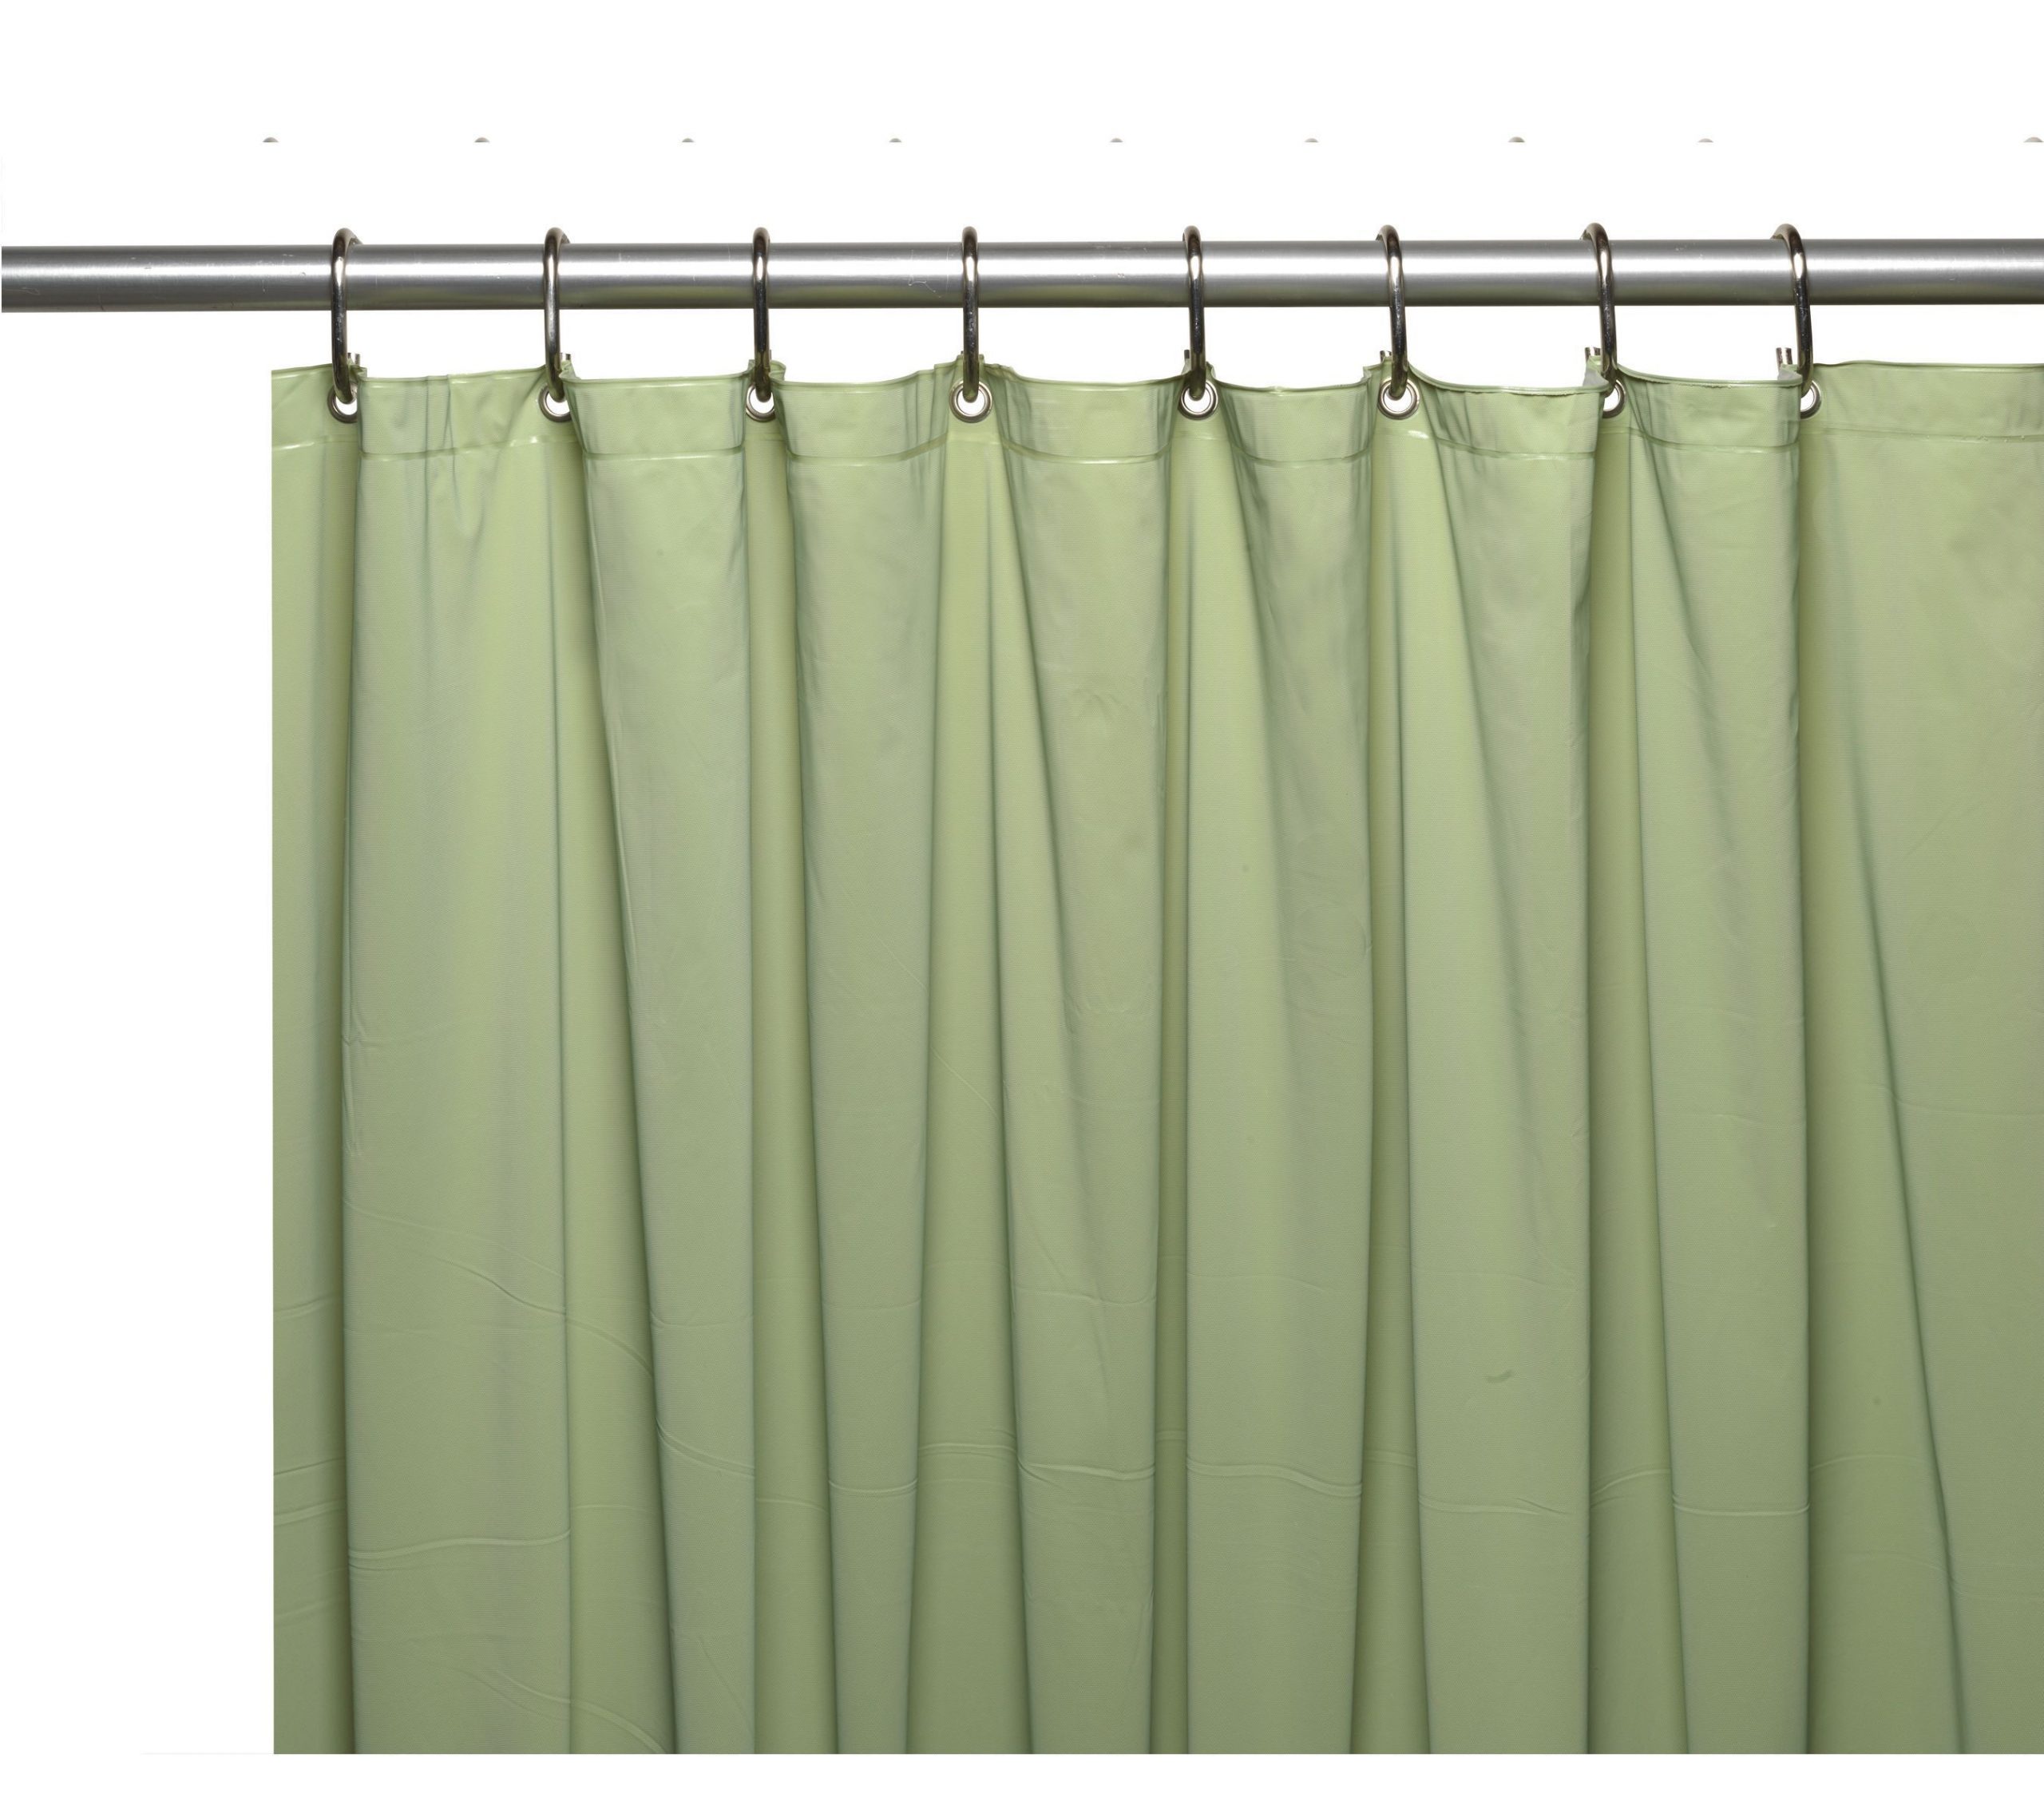 Best Quality Extra Long Shower Curtains, Extra Long Shower Curtain Size